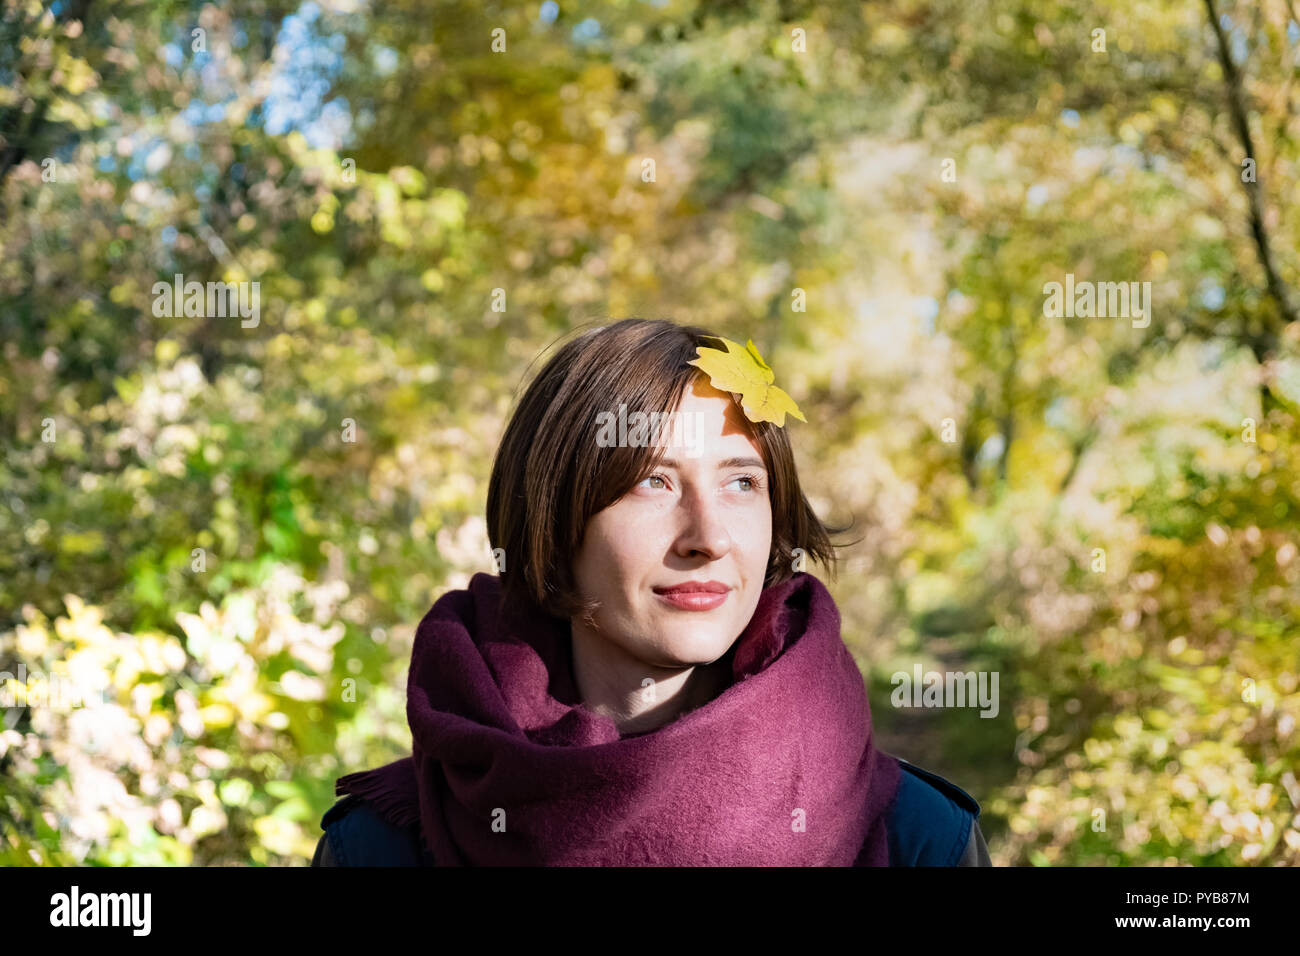 Portrait of young woman in scarf with autumn leave on her head. Maple leaf on the hair of a female person standing in beautiful green and yellow natur Stock Photo